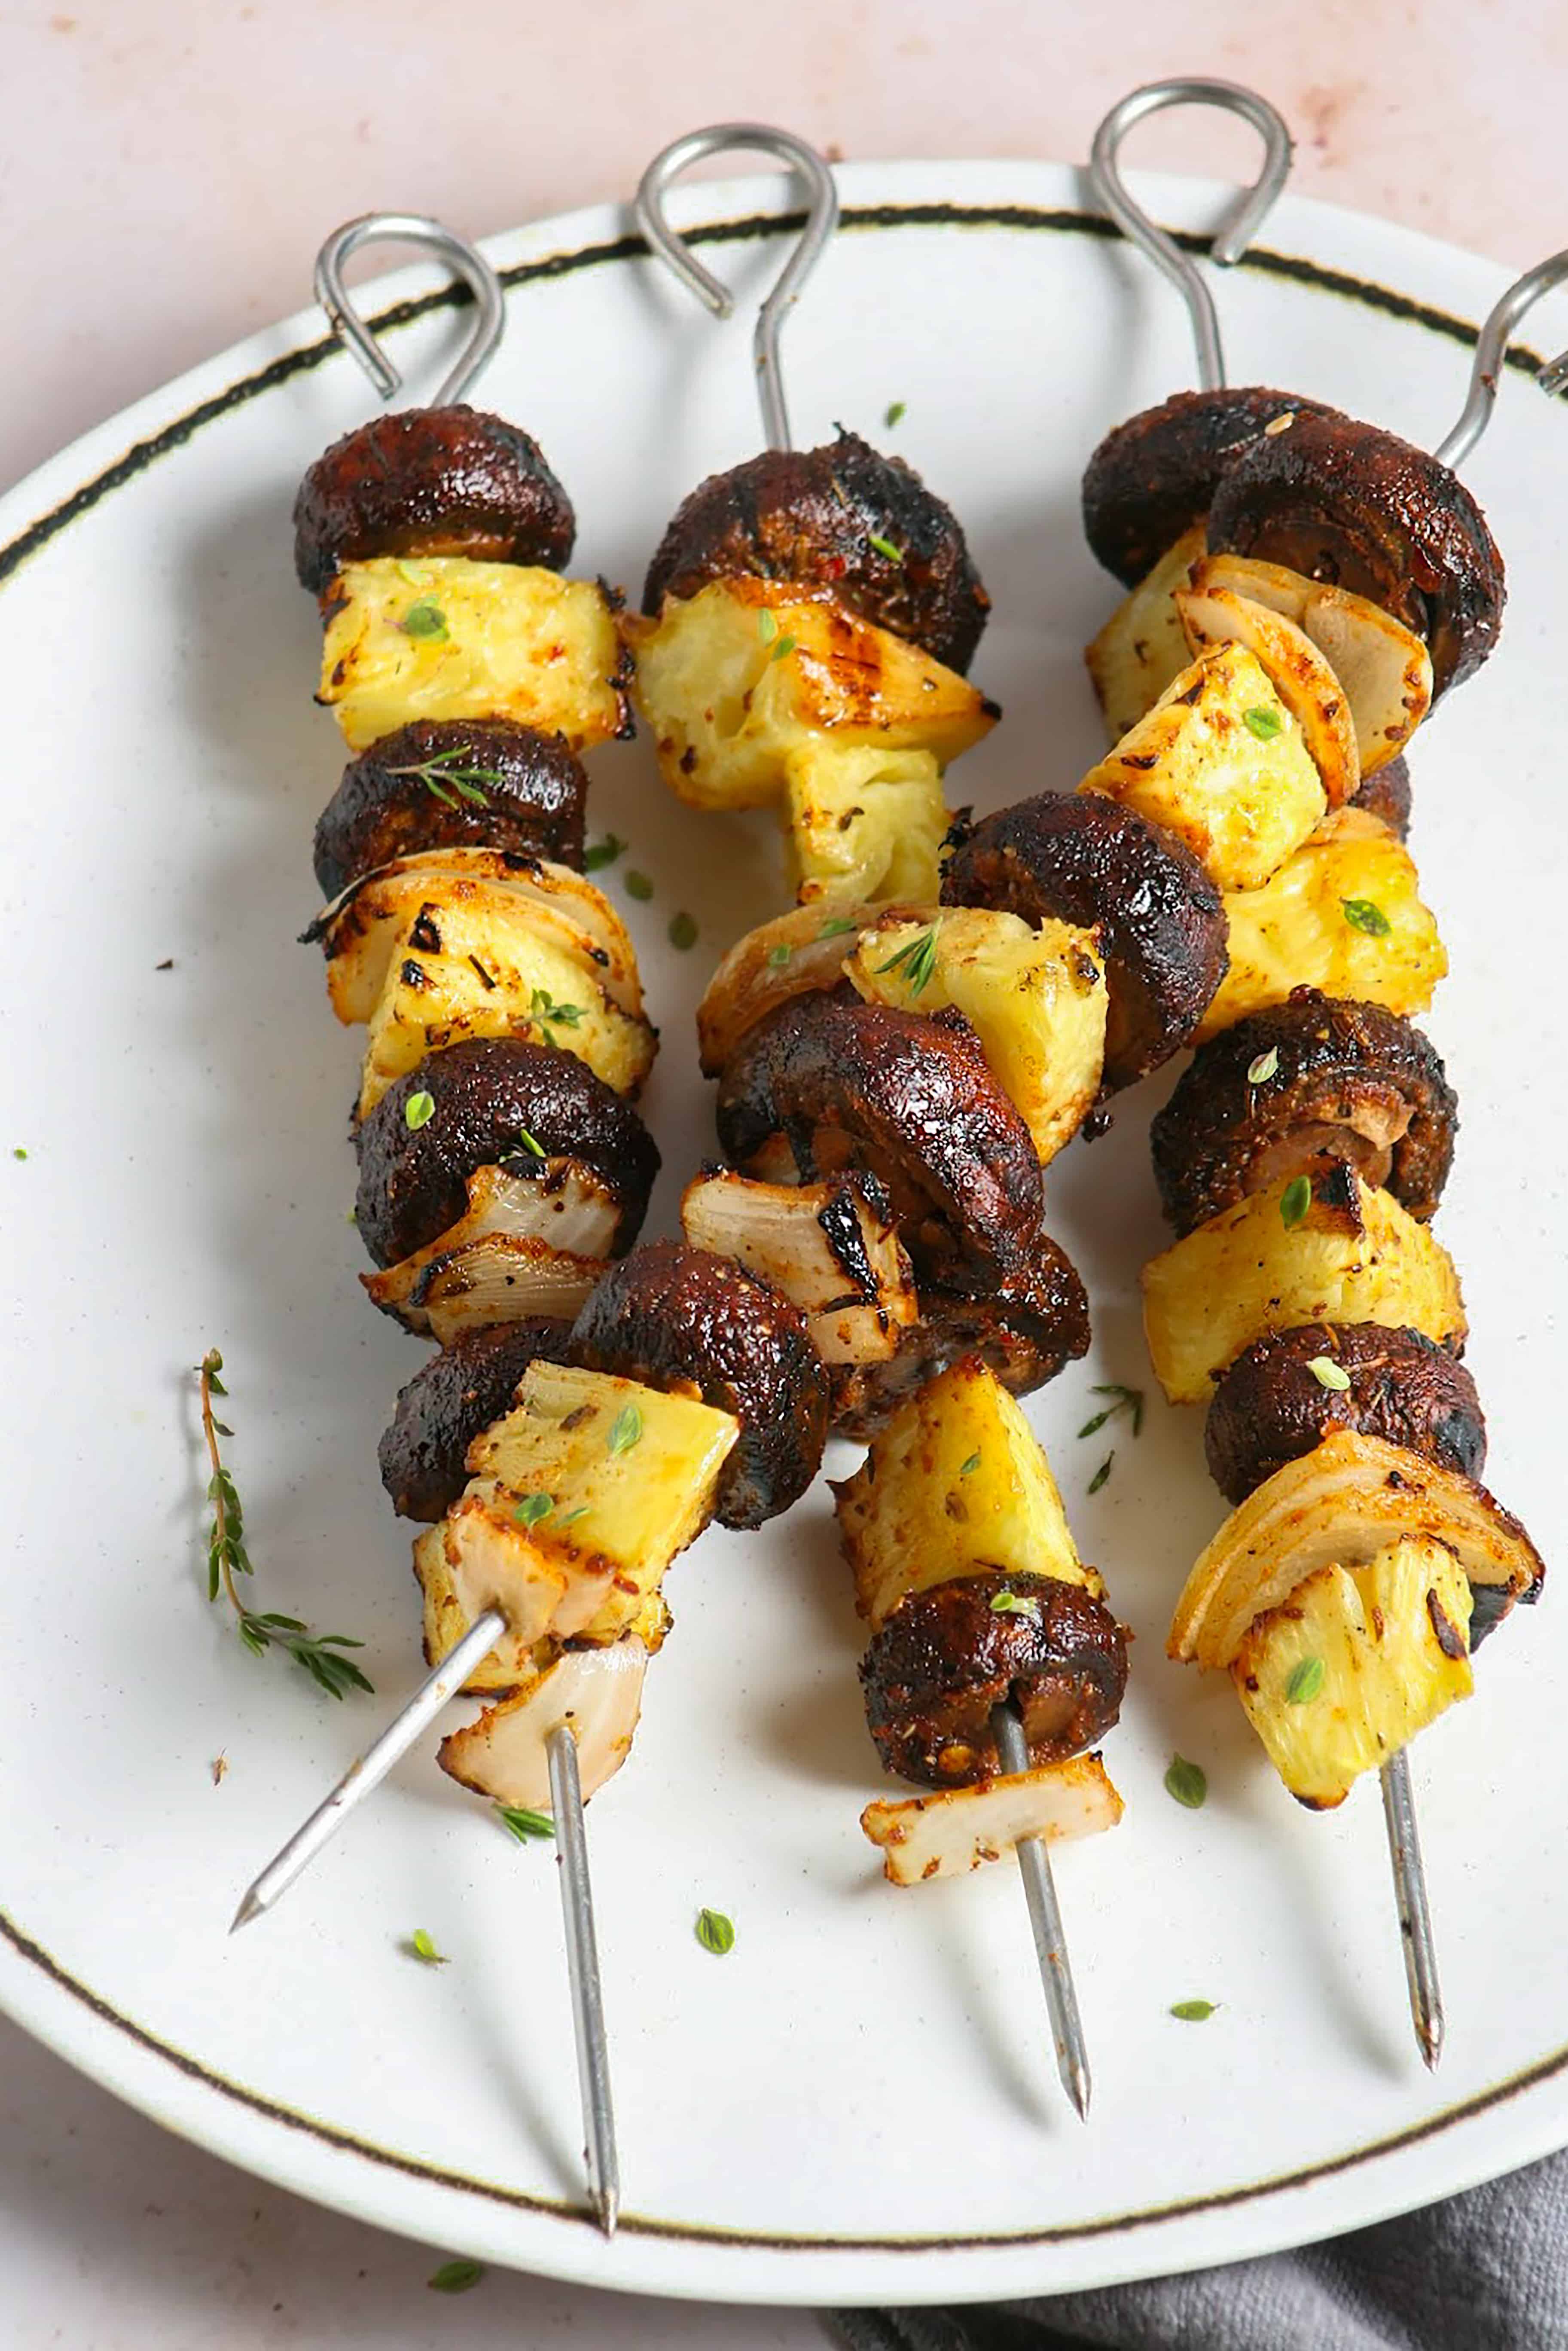 Vegan Jamaican Jerk Mushroom Skewers. made on the grill. Photographed on a white plate on a stone table